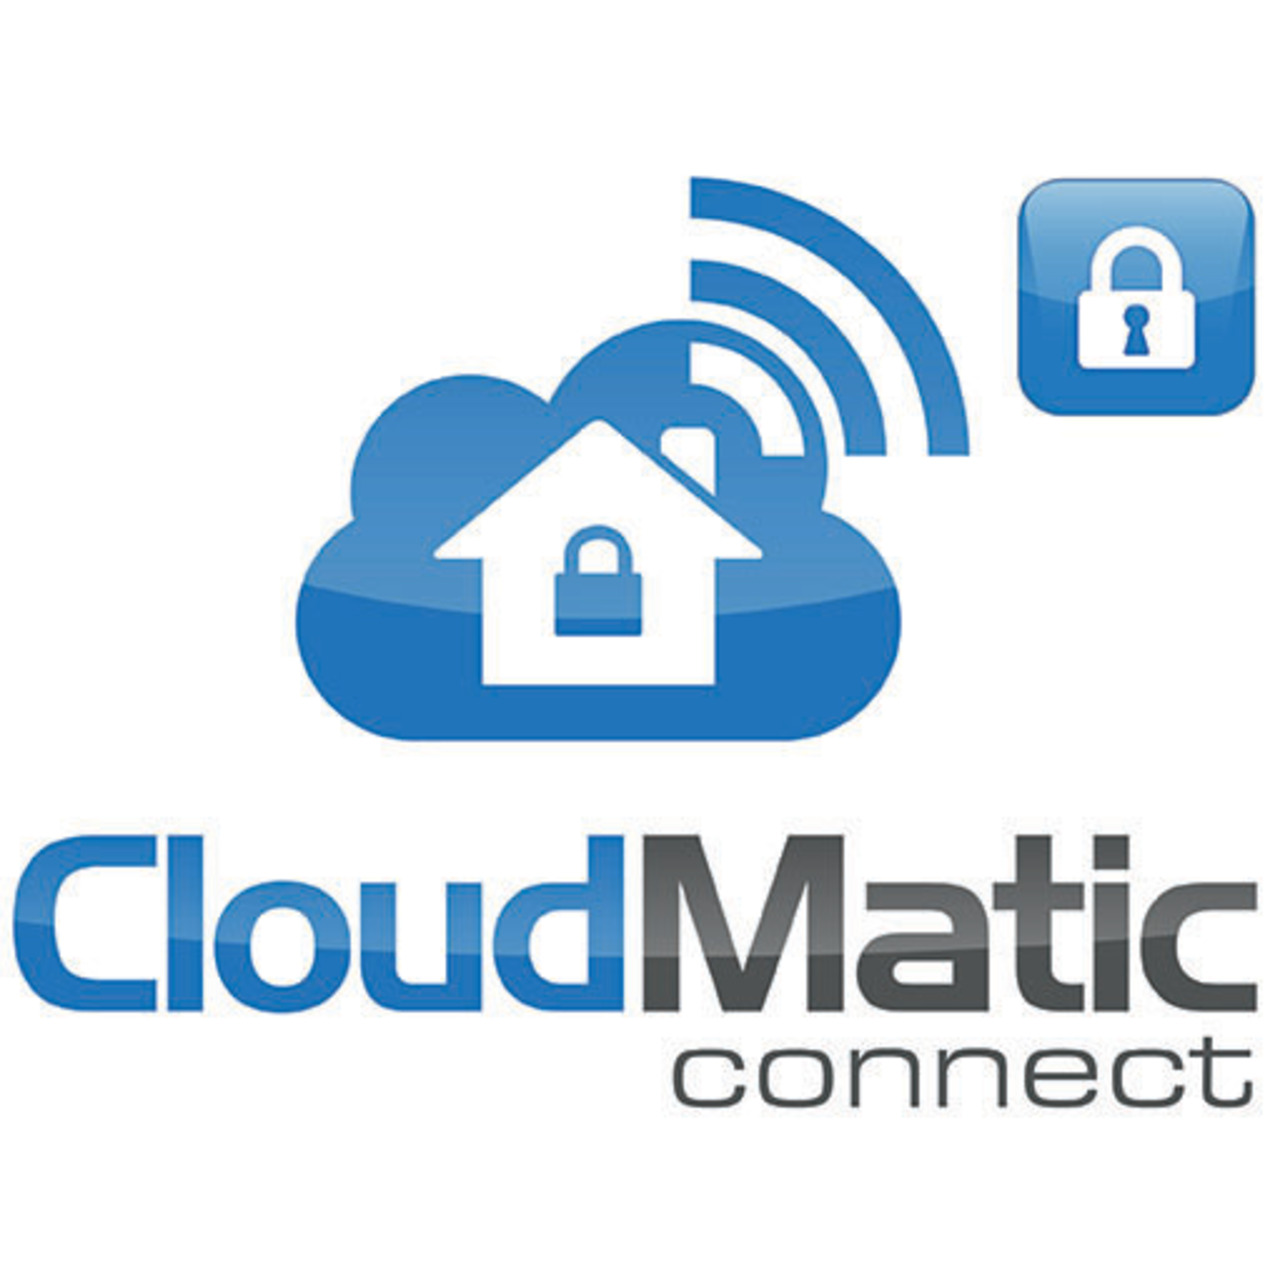 CloudMatic connect- 12 Monate Fernzugang für Homematic Smart Home - Hausautomation